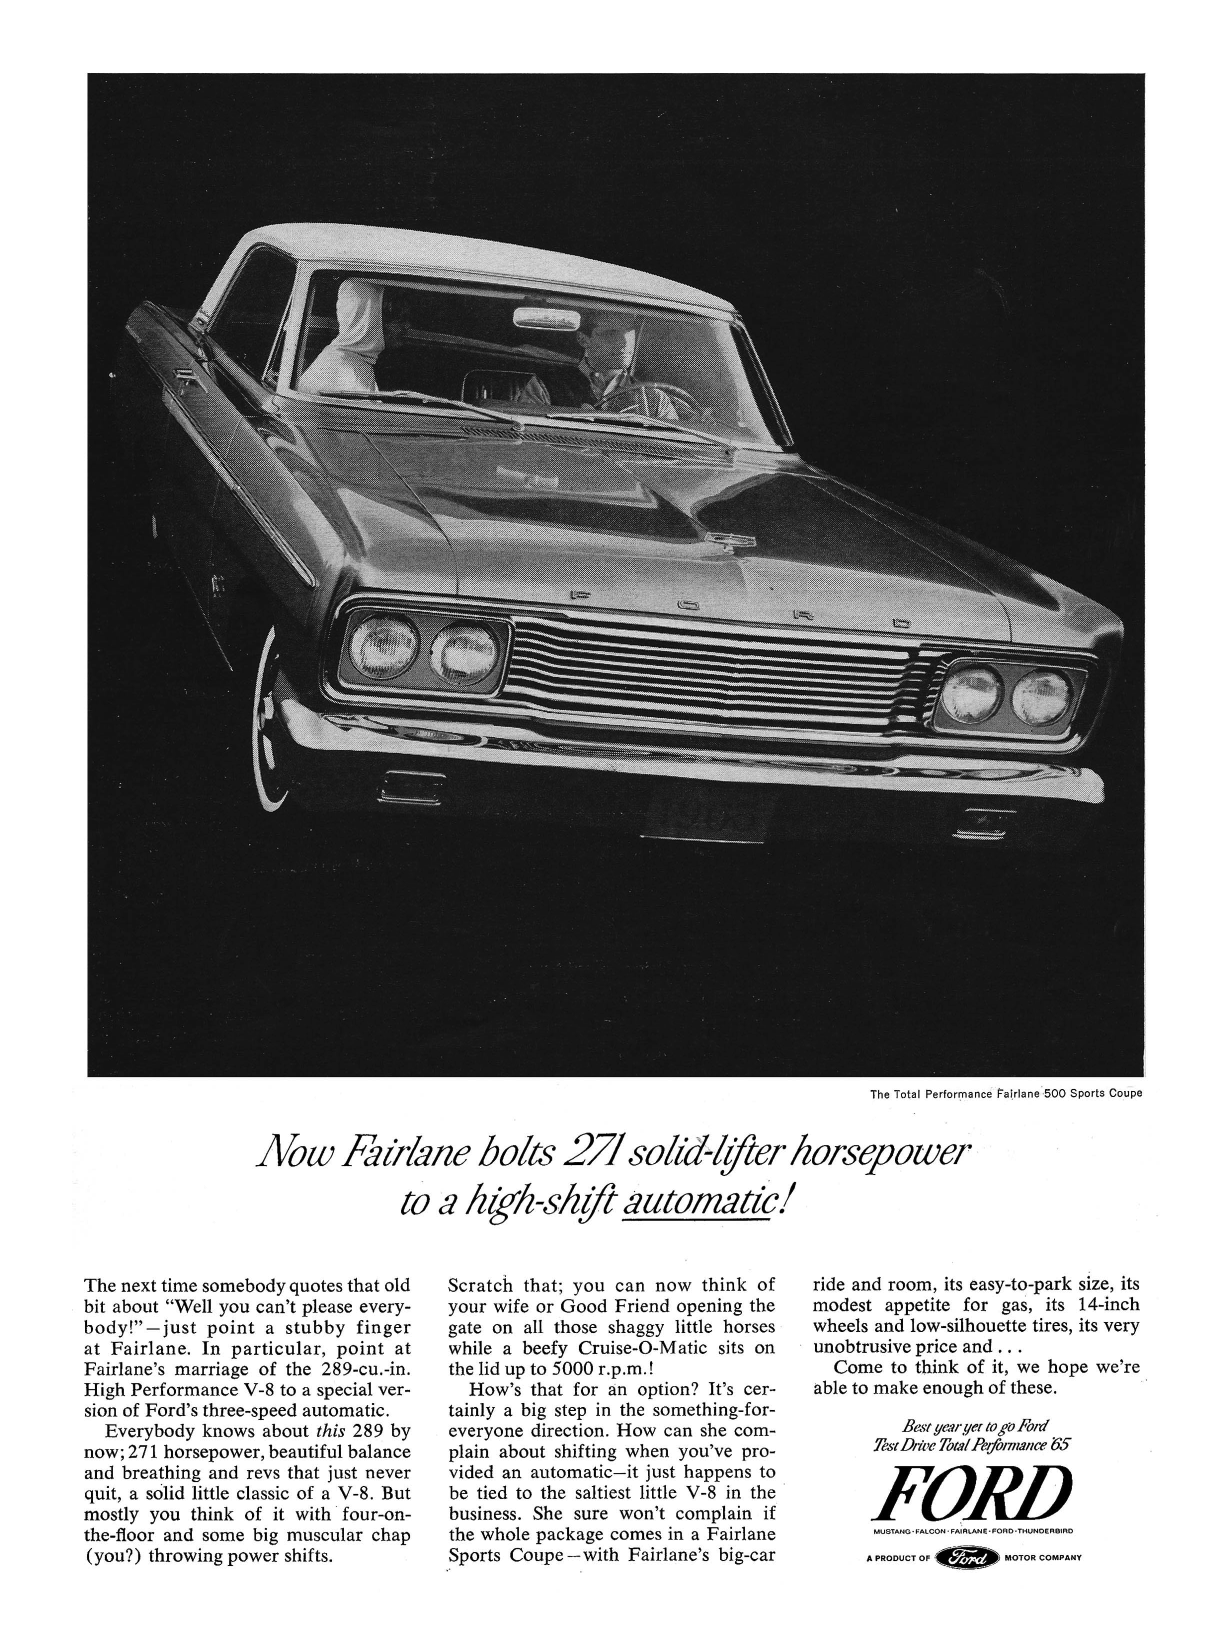 1965 Ford Ad Fairlane "Now Fairlane bolts 271 solid lifter horsepower to a high-shift automatic!"